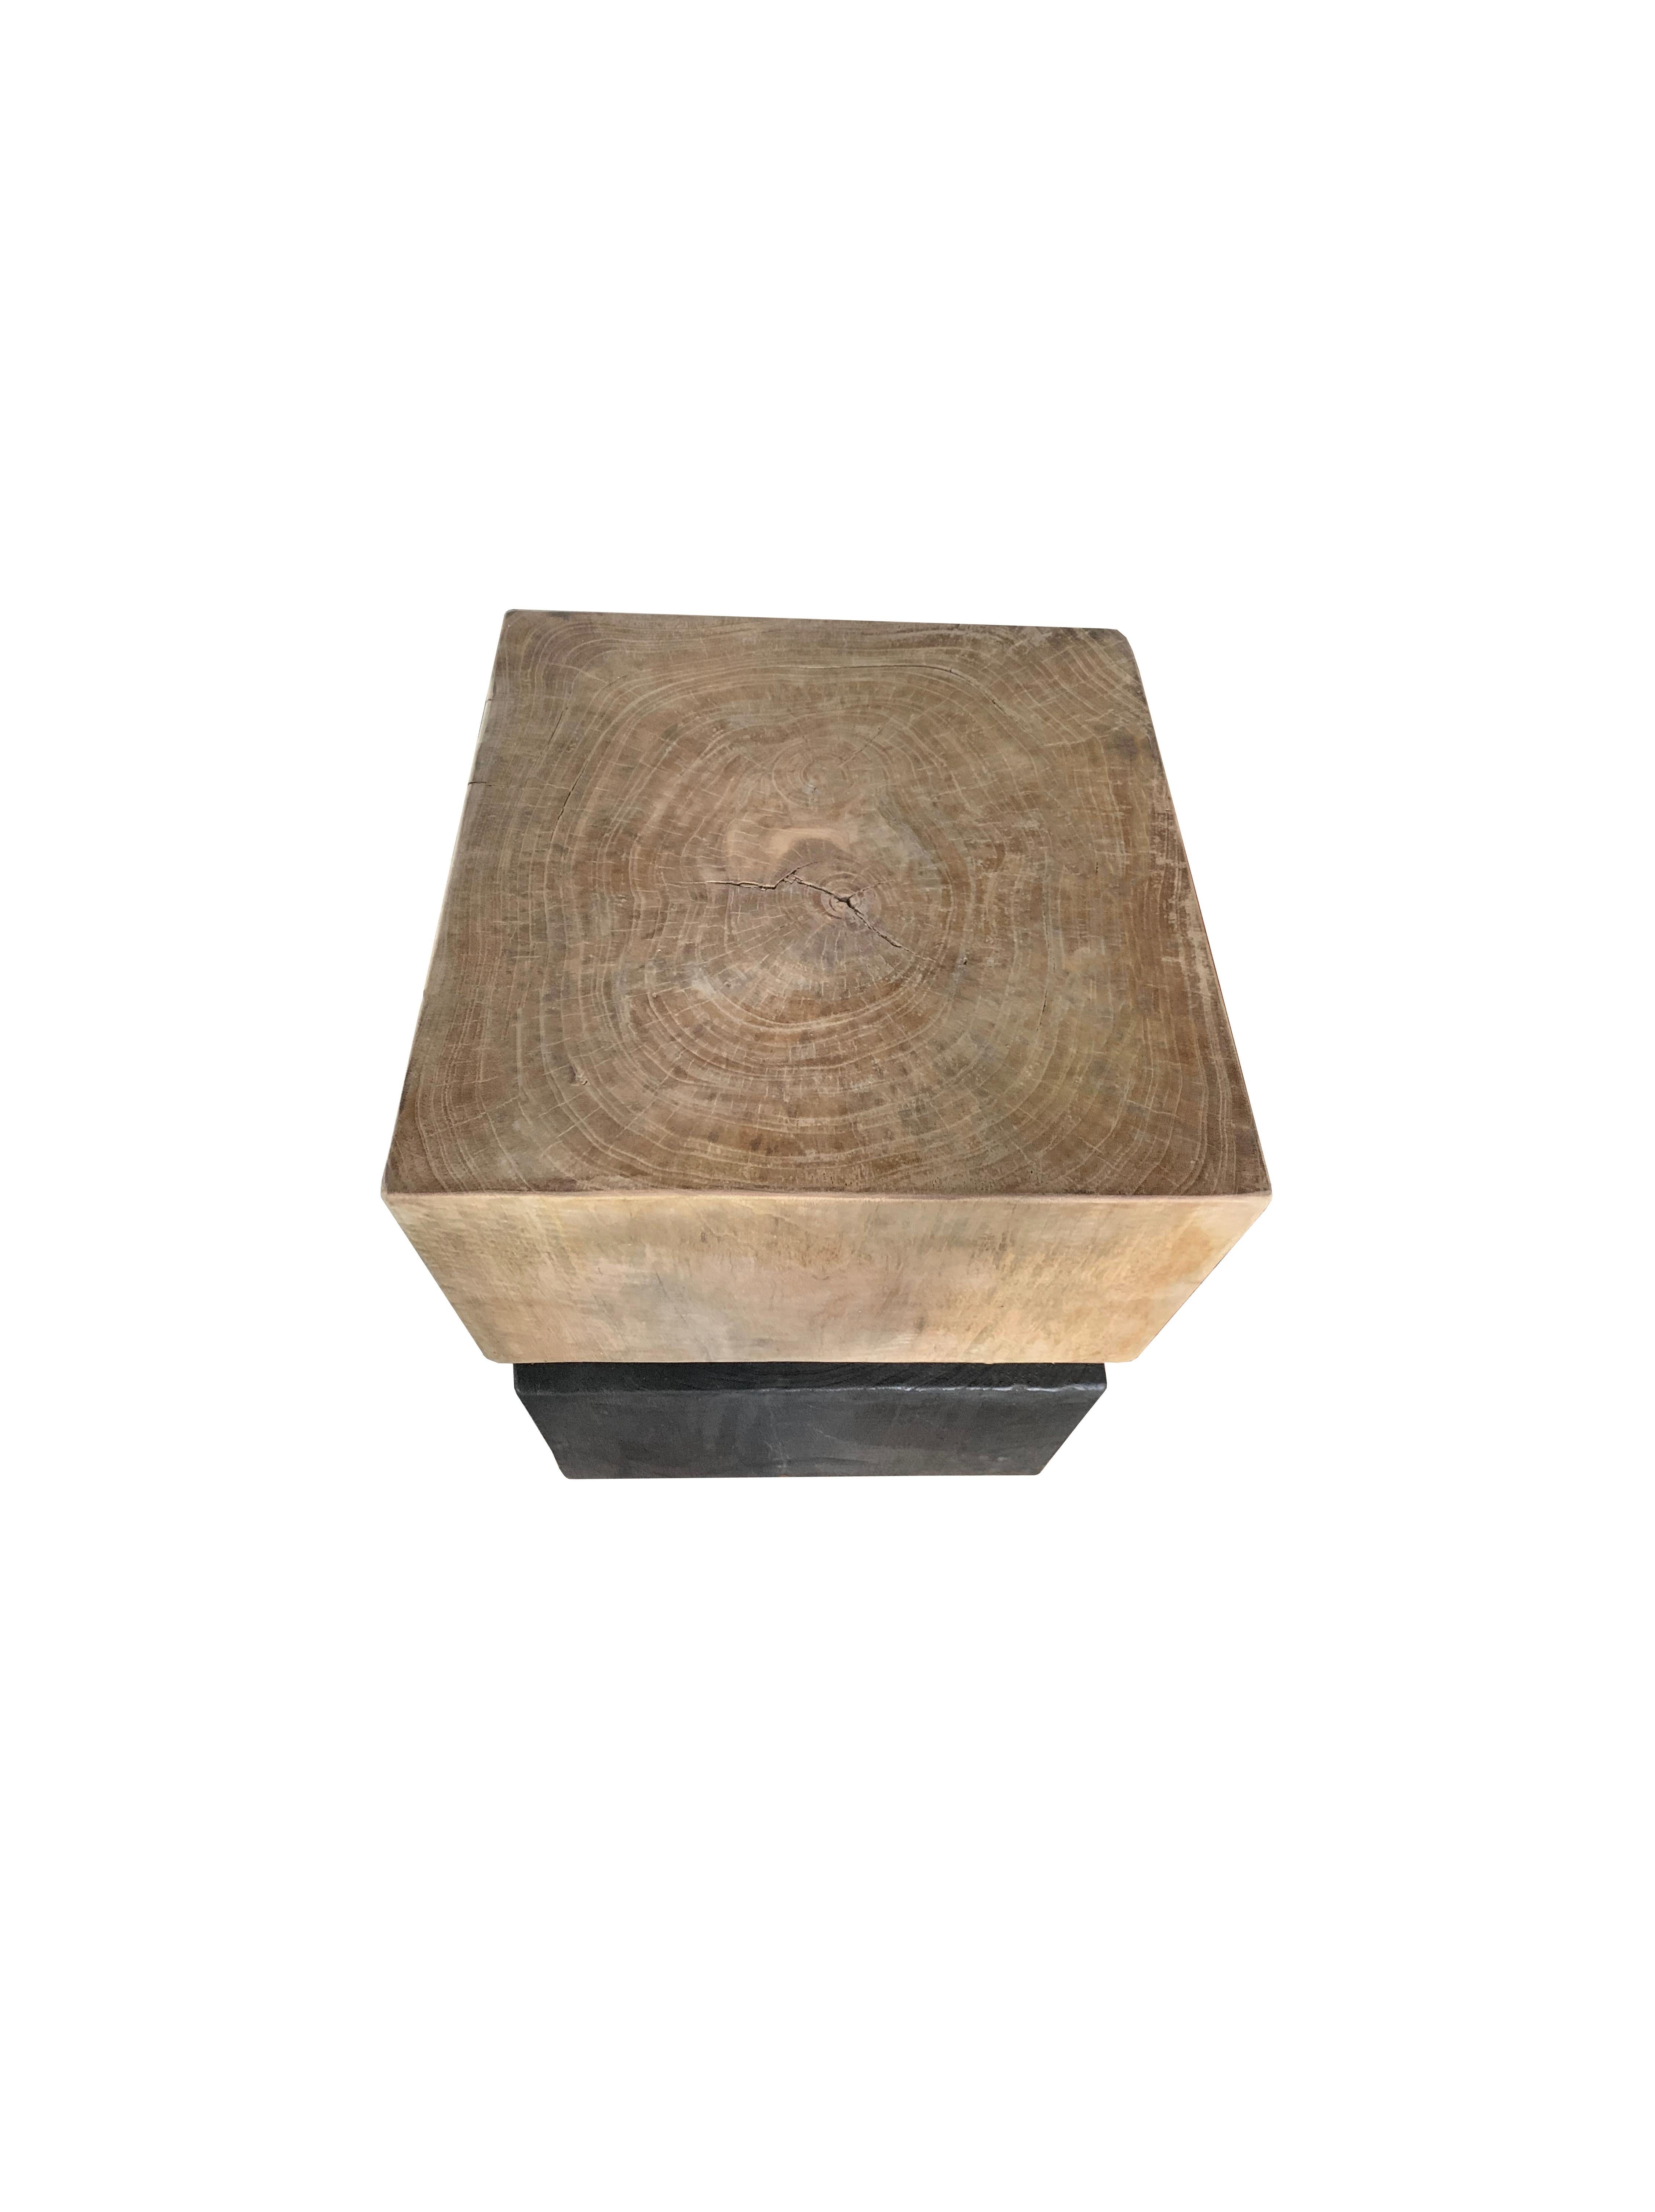 Organic Modern Sculptural Side Table Solid Mango Wood with Burnt & Natural Finish For Sale